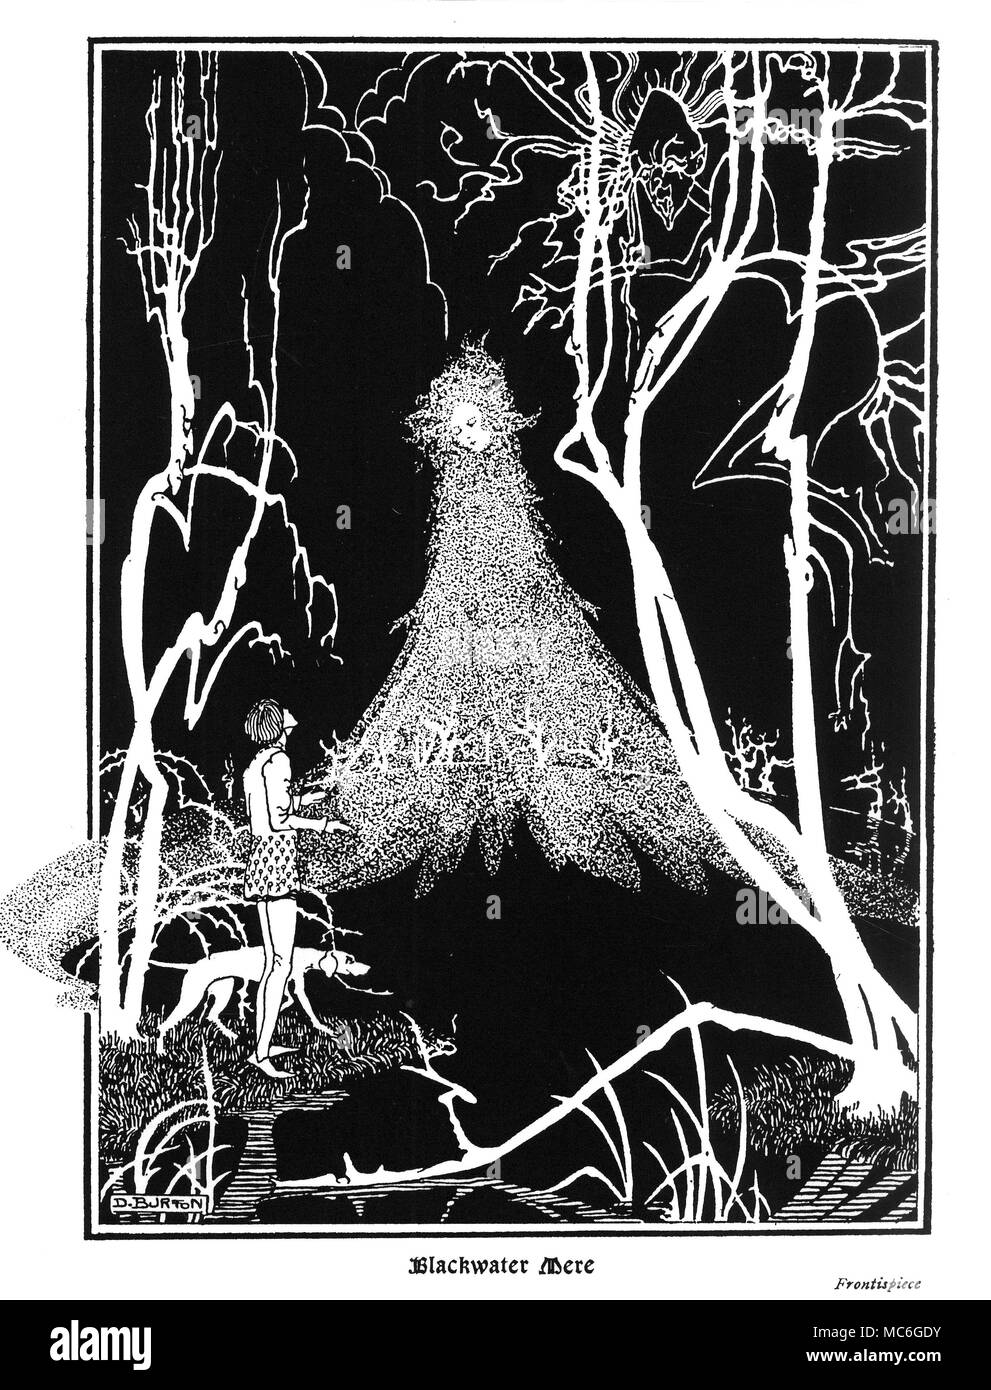 HAUNTINGS - HUNTRESS HAG Frontispiece illustration by Doris Burton, to the 'mediaeval romance' by Harold Boulton, The Huntress Hag of the Blackwater, 1926 edition. The picture illustrates the poem The Reverie: Some presence boding nameless fear Seemed hovering round Blackwater Mere. This is the Huntress Hag of the Blackwater. Stock Photo